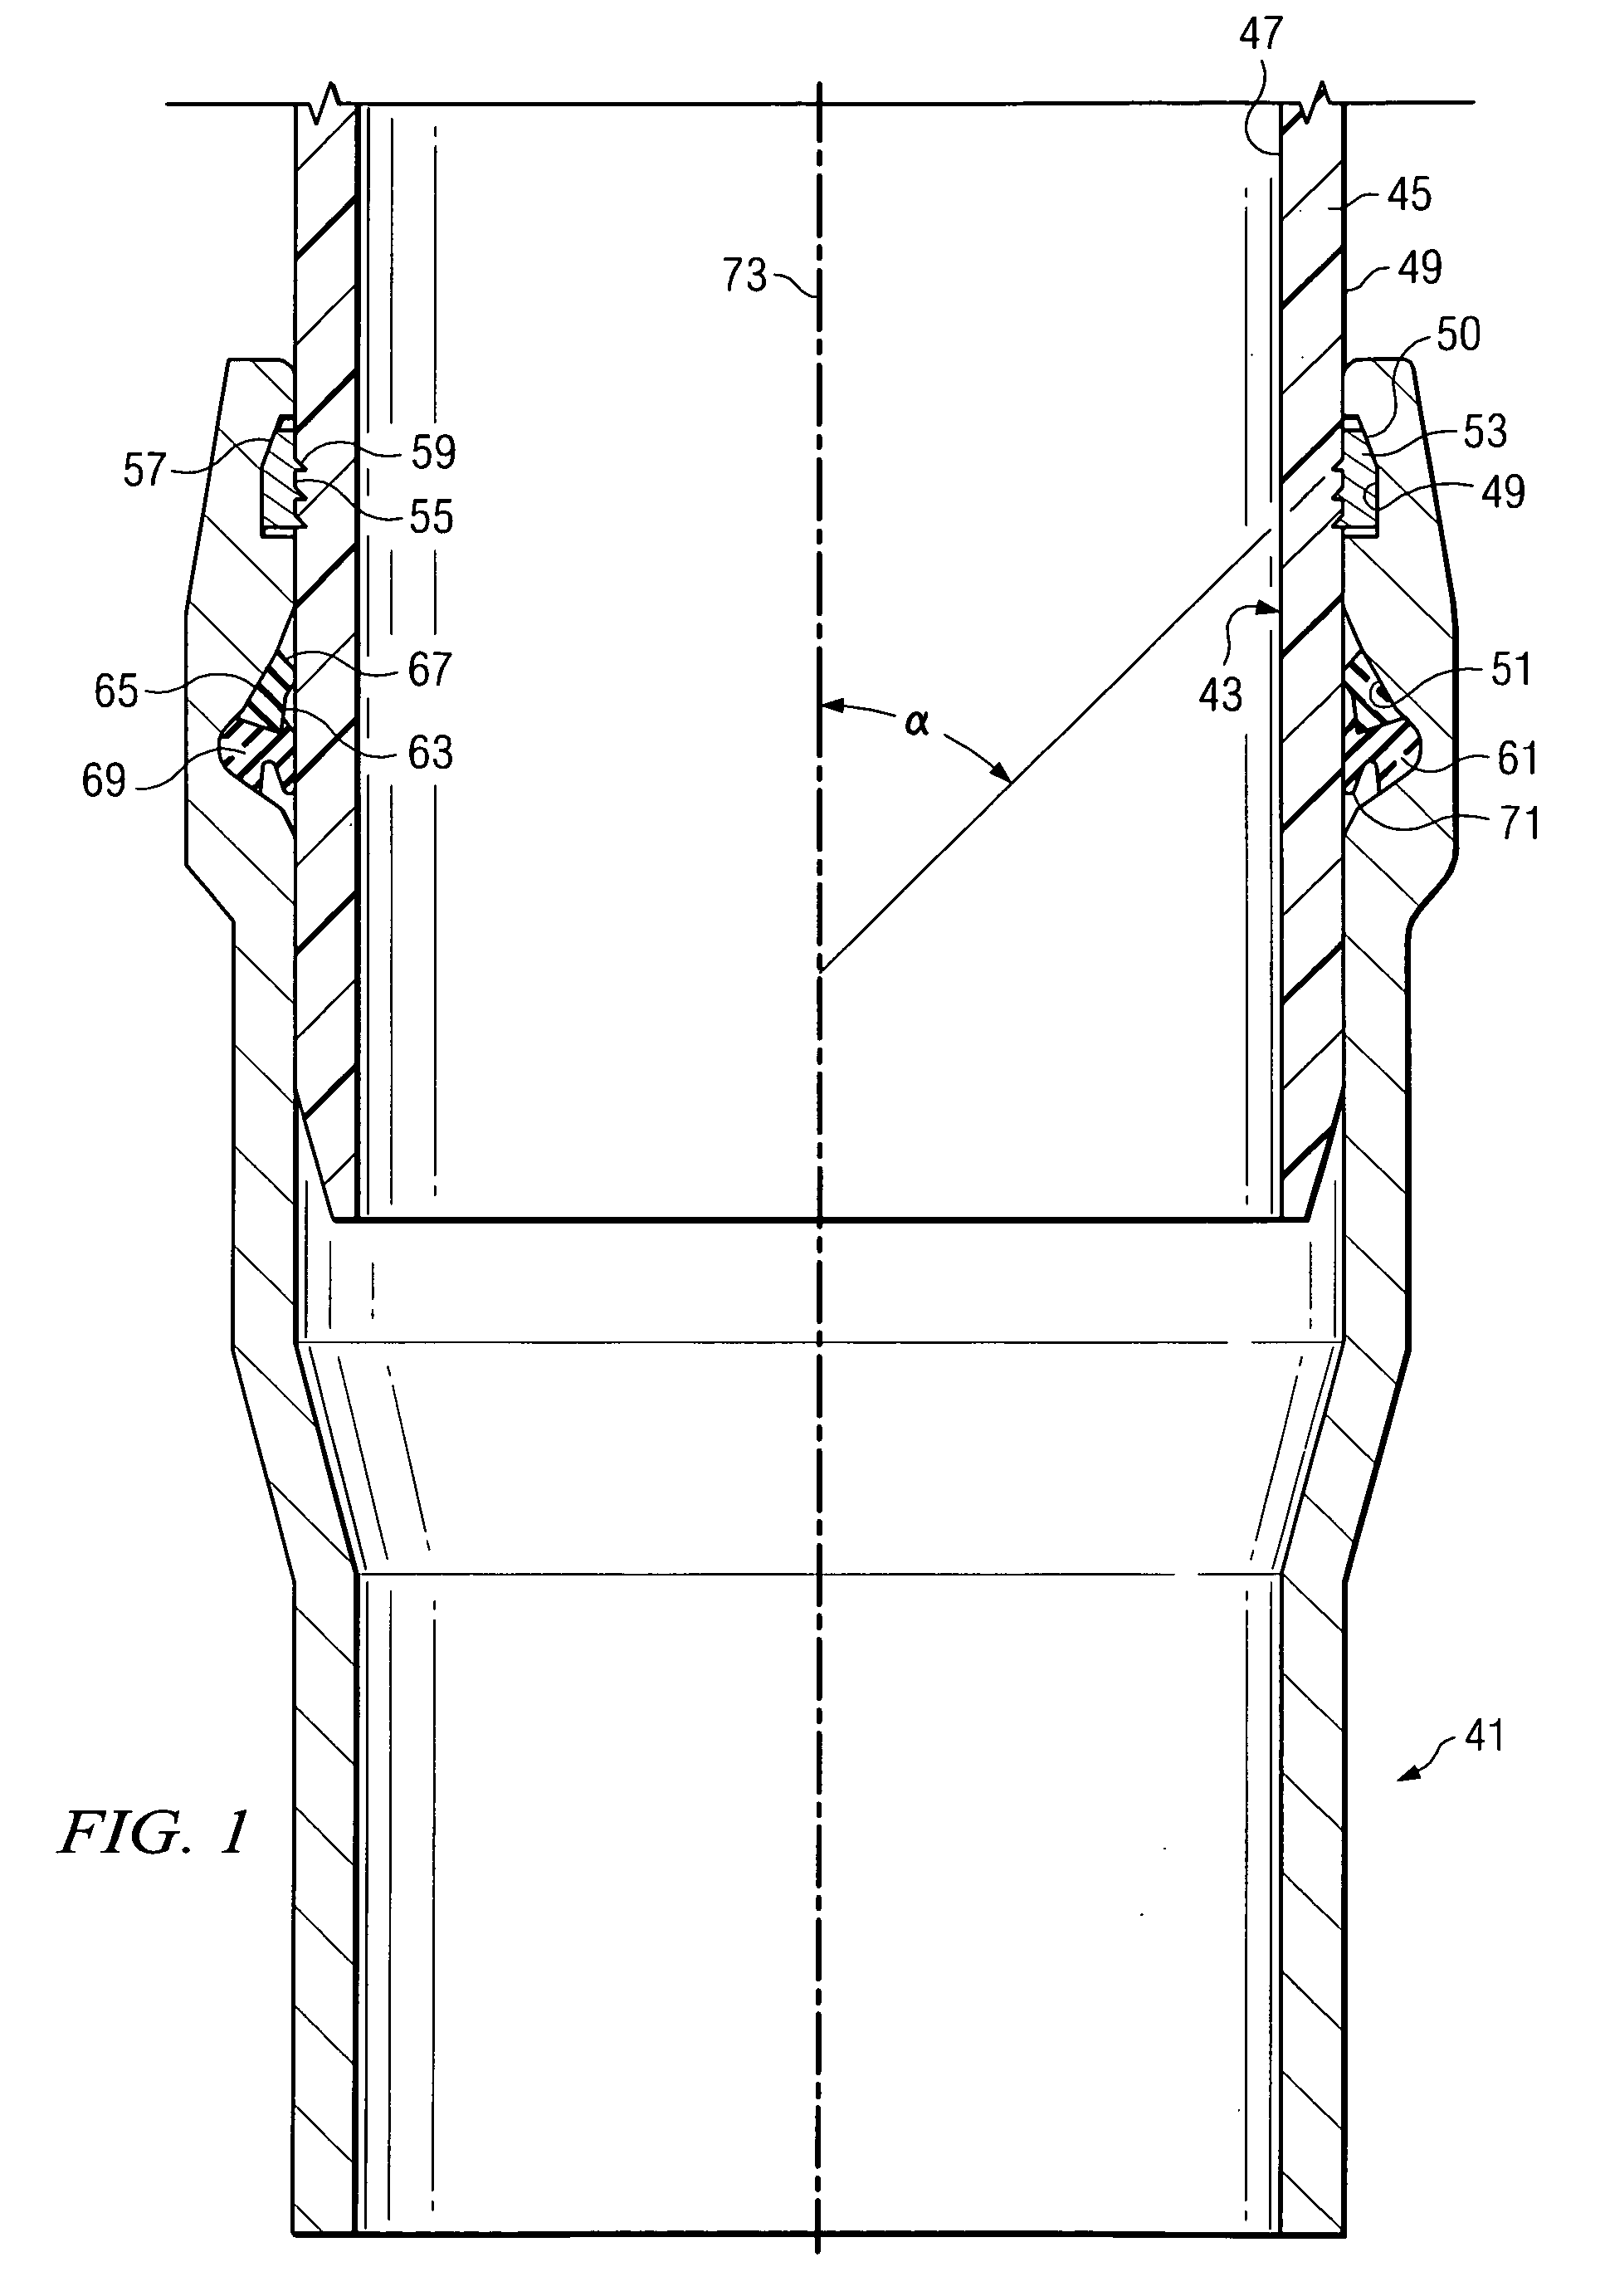 Self restrained joint for ductile iron pipe and fittings